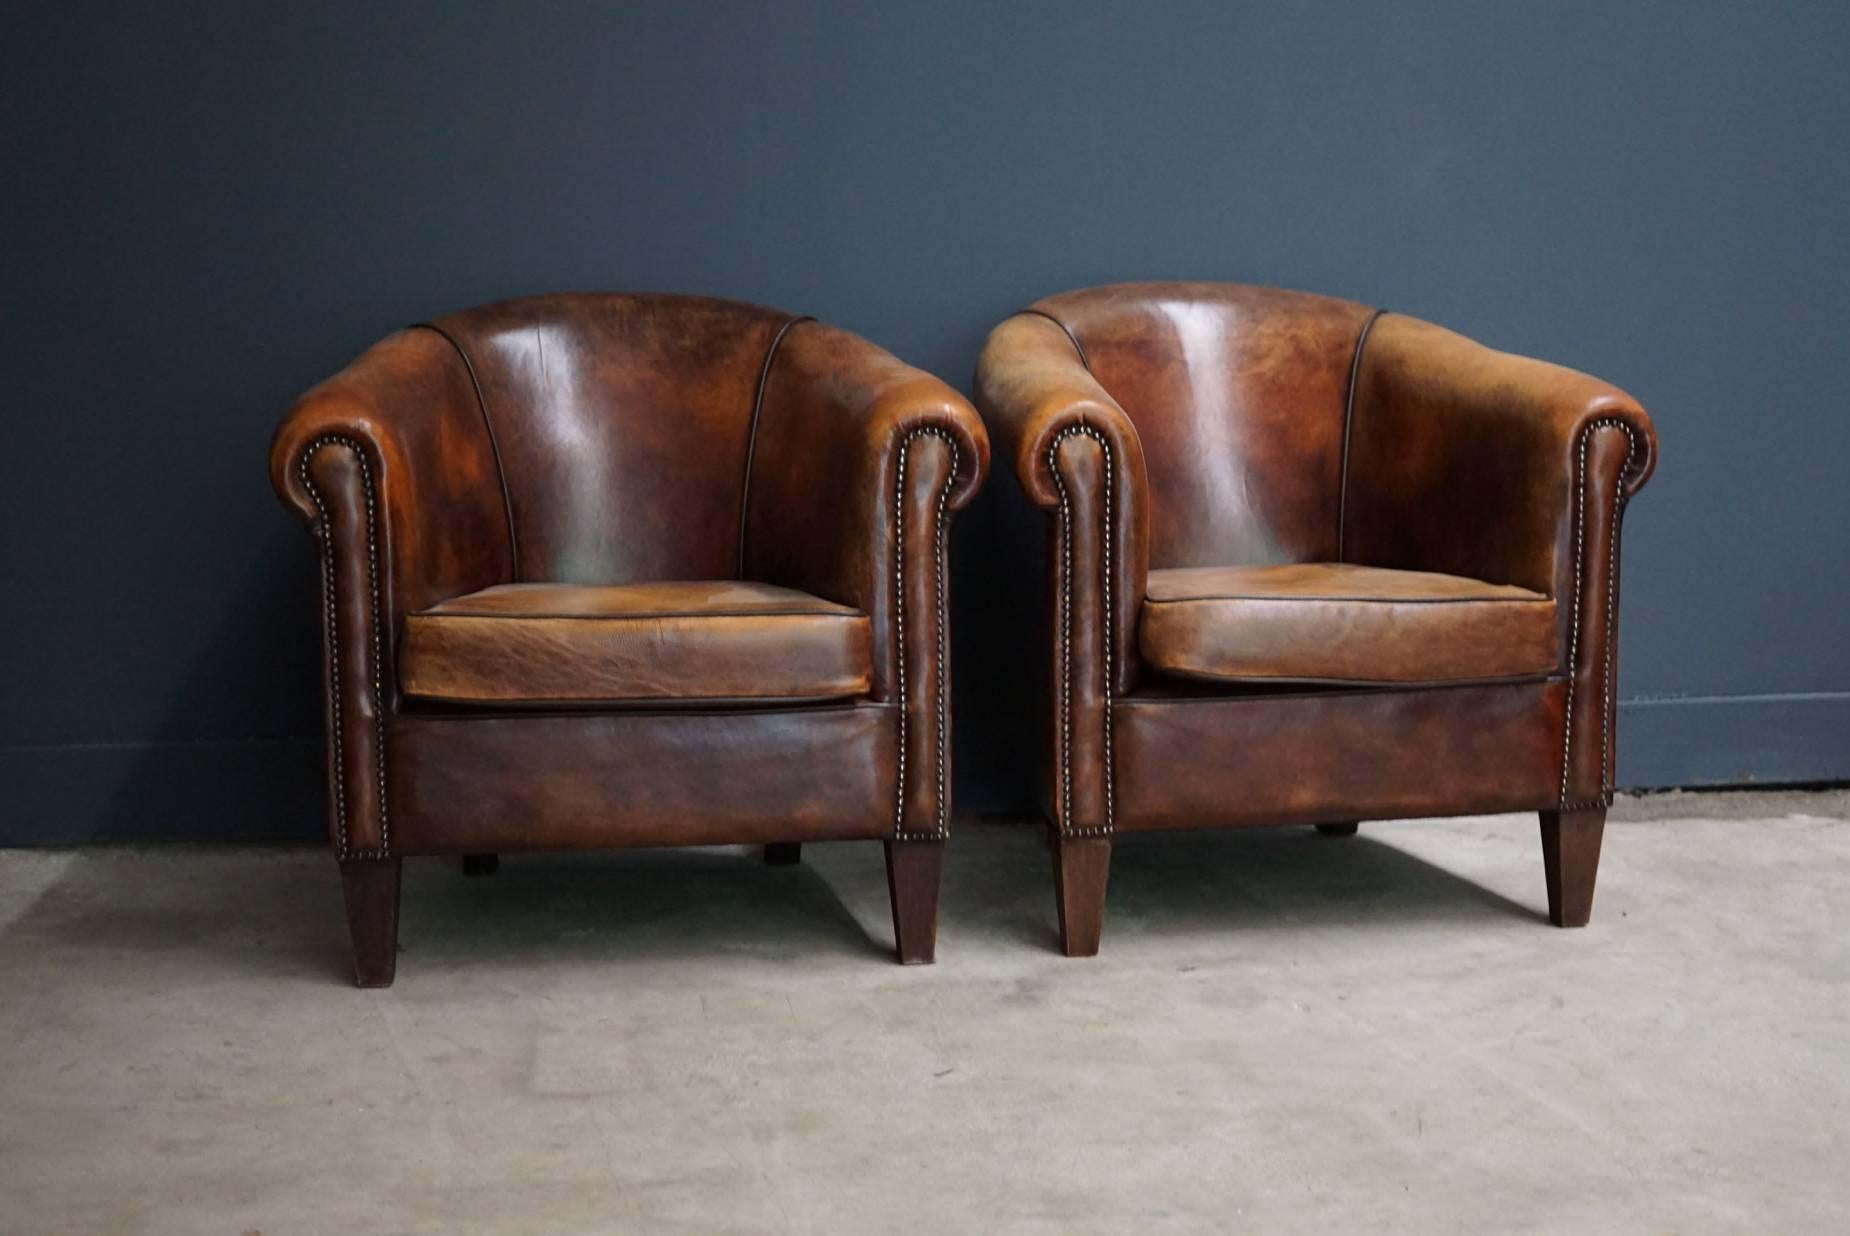 This pair of cognac-colored leather club chairs comes from the Netherlands. They feature rivets and wooden legs.